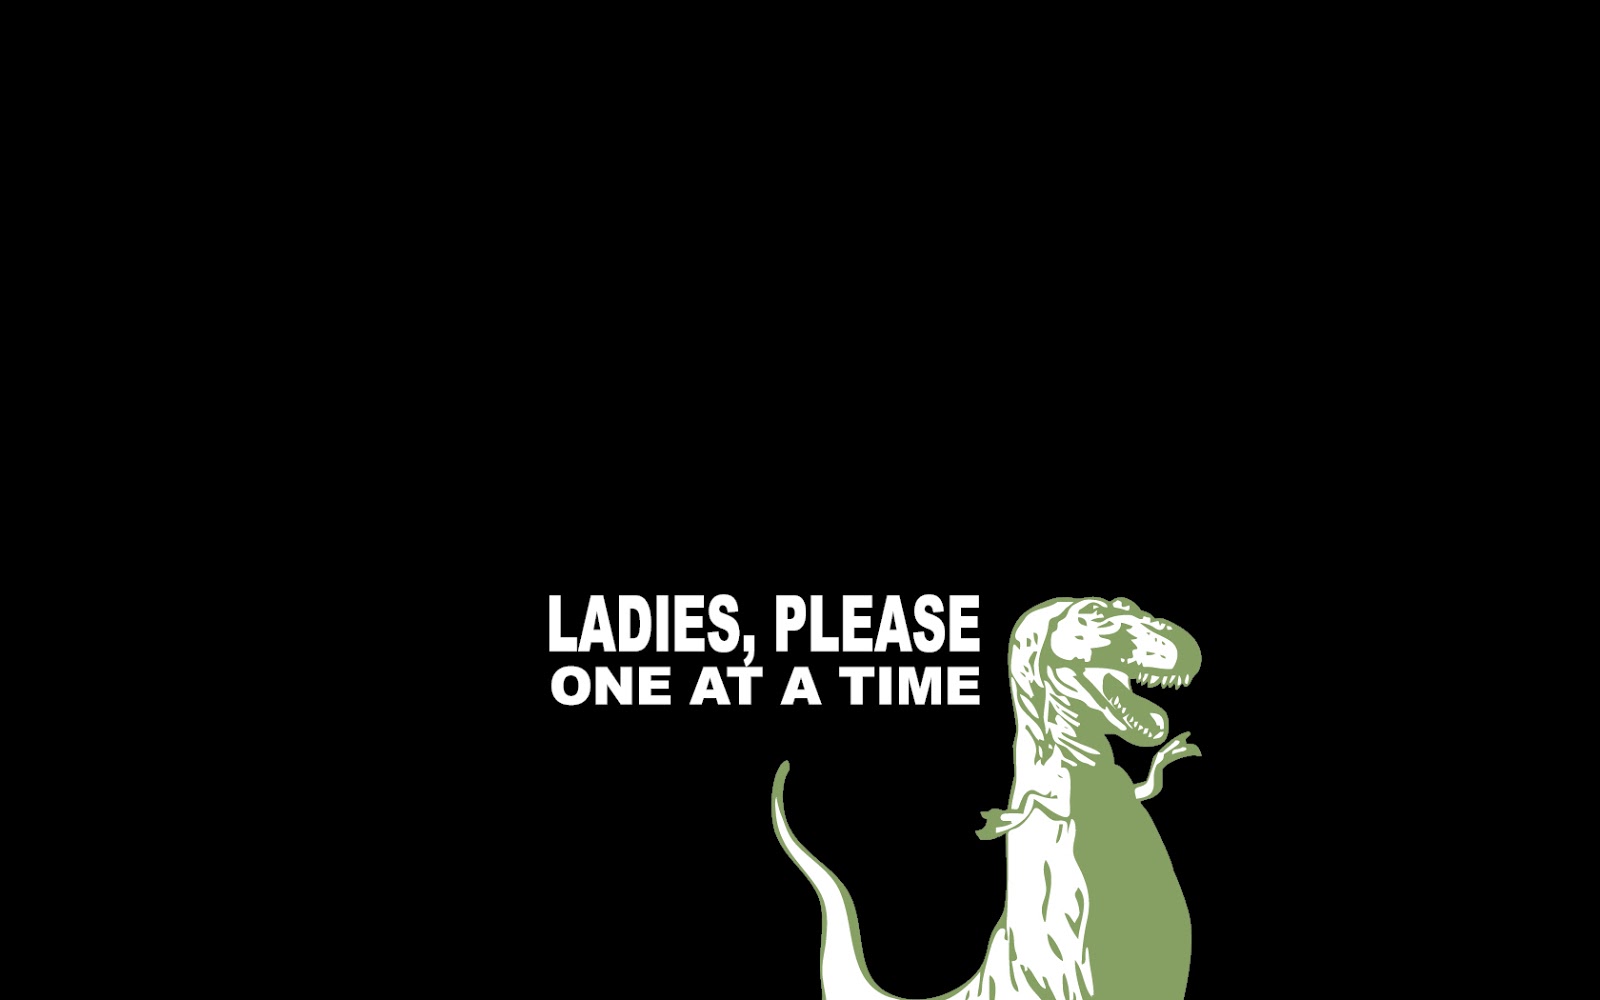 This Ladies Please One At A Time T Rex Say Wallpaper Is Suitable For